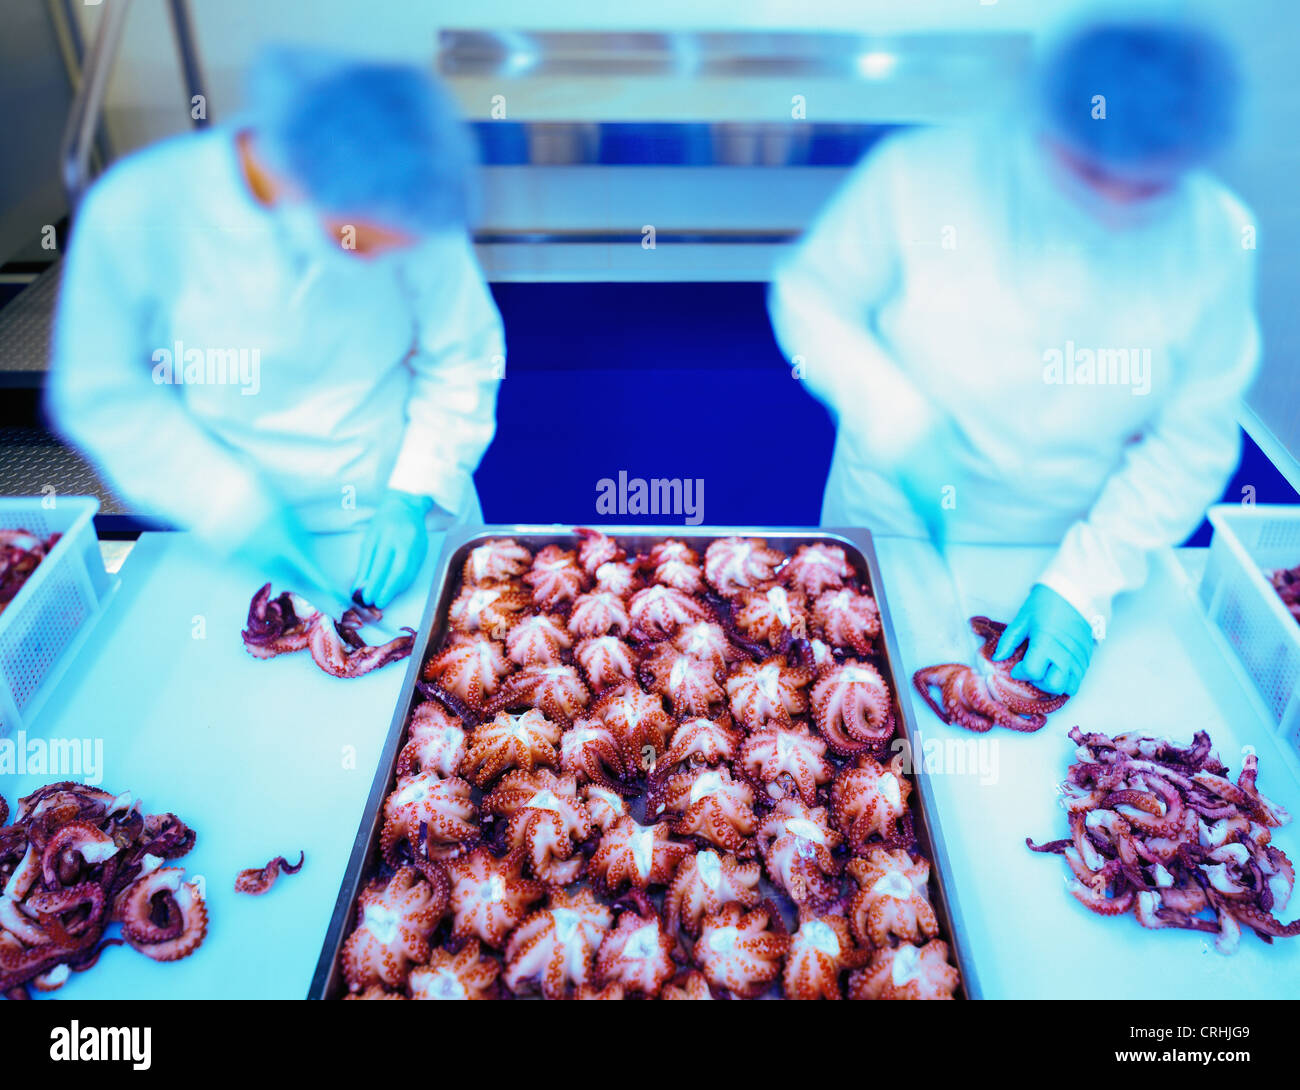 Workers in seafood processing plant Stock Photo